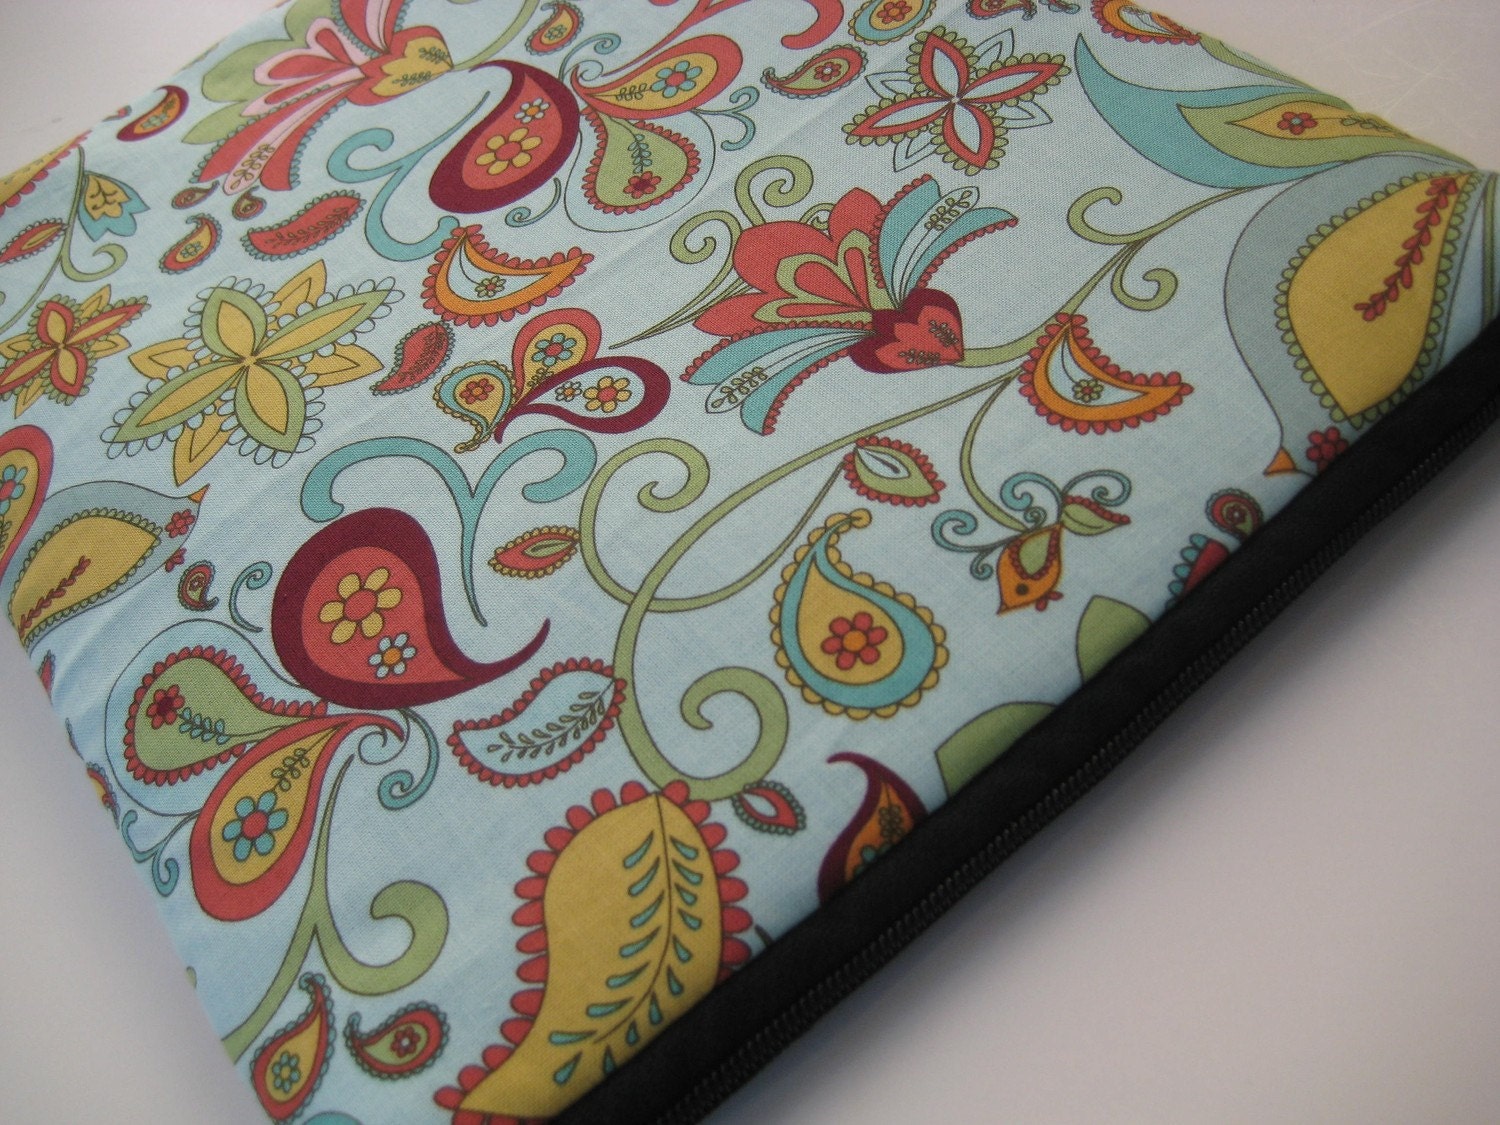 SALE - Padded iPad Case - Handmade with Water Resistant Lining (reg 48)